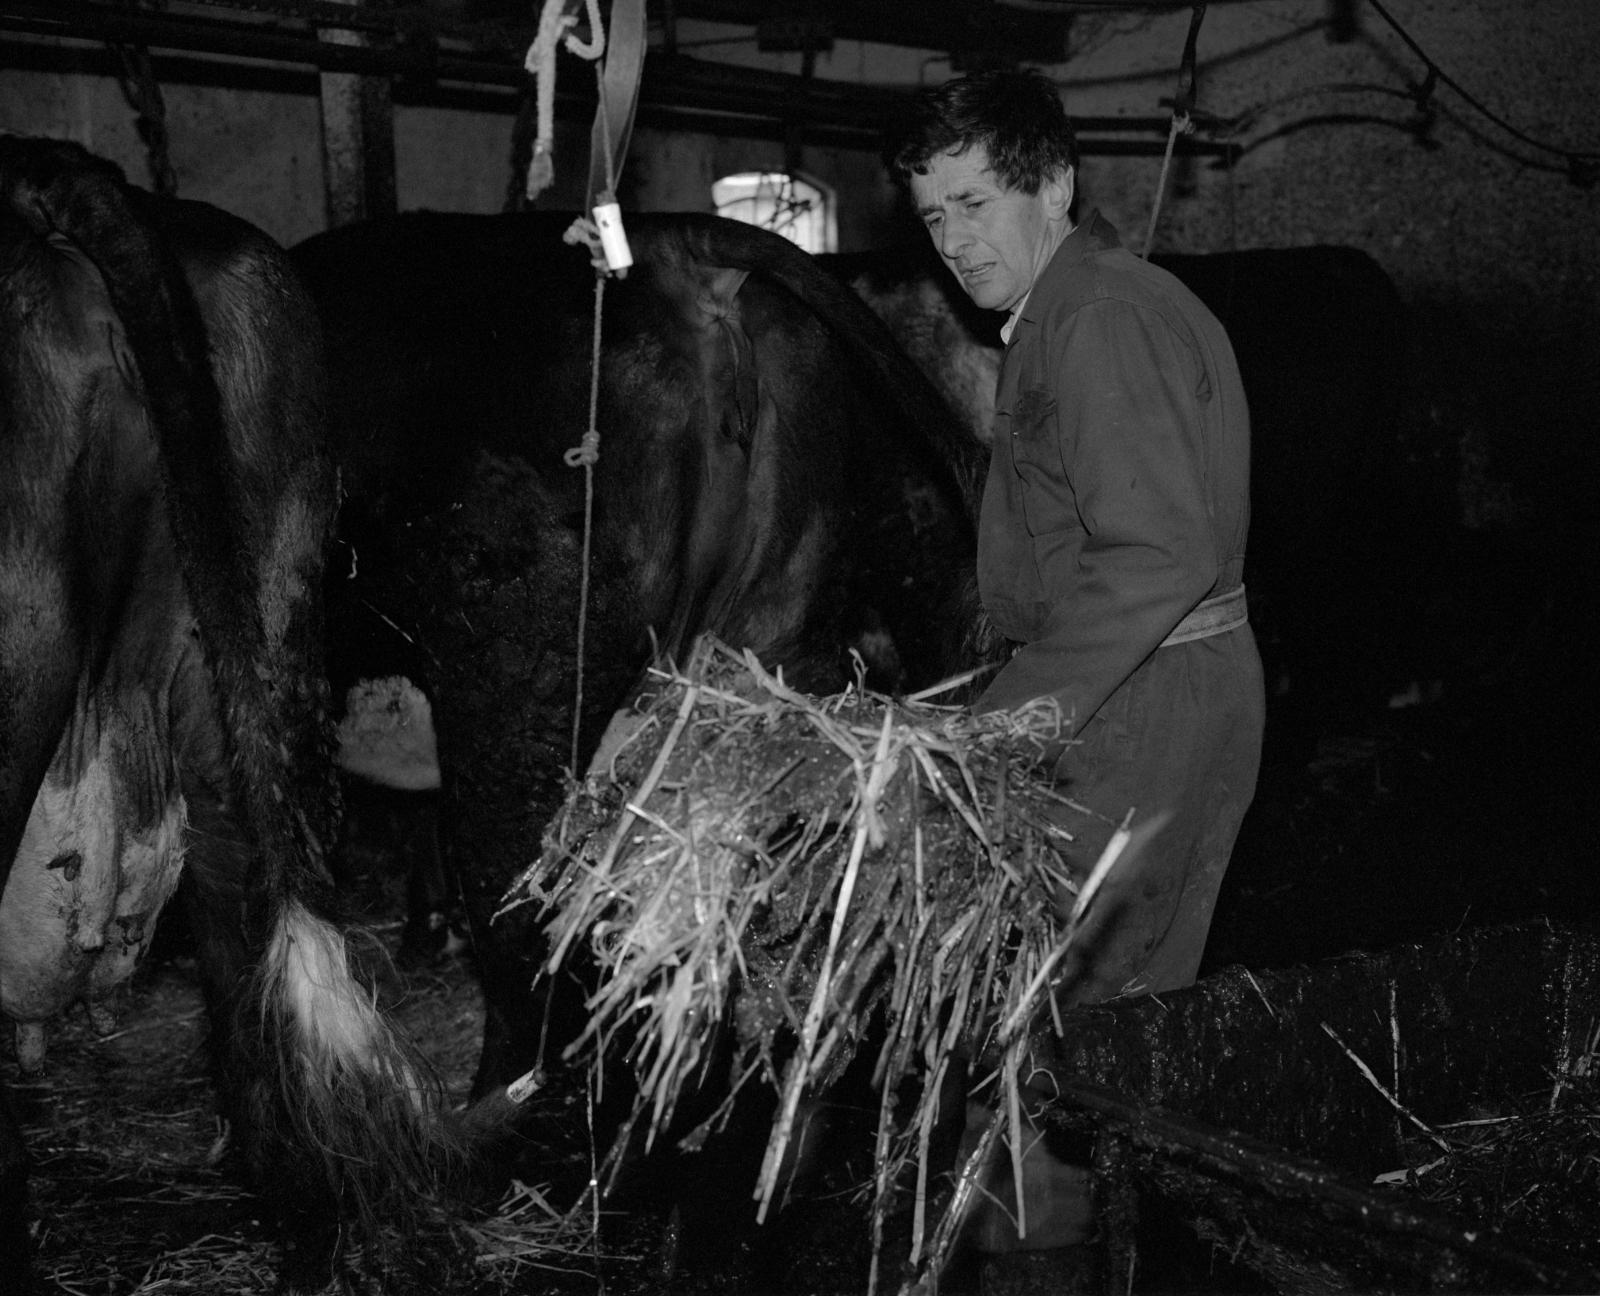 Farmer Cees mucks out the cowsh...he Netherlands. March 17, 2000.